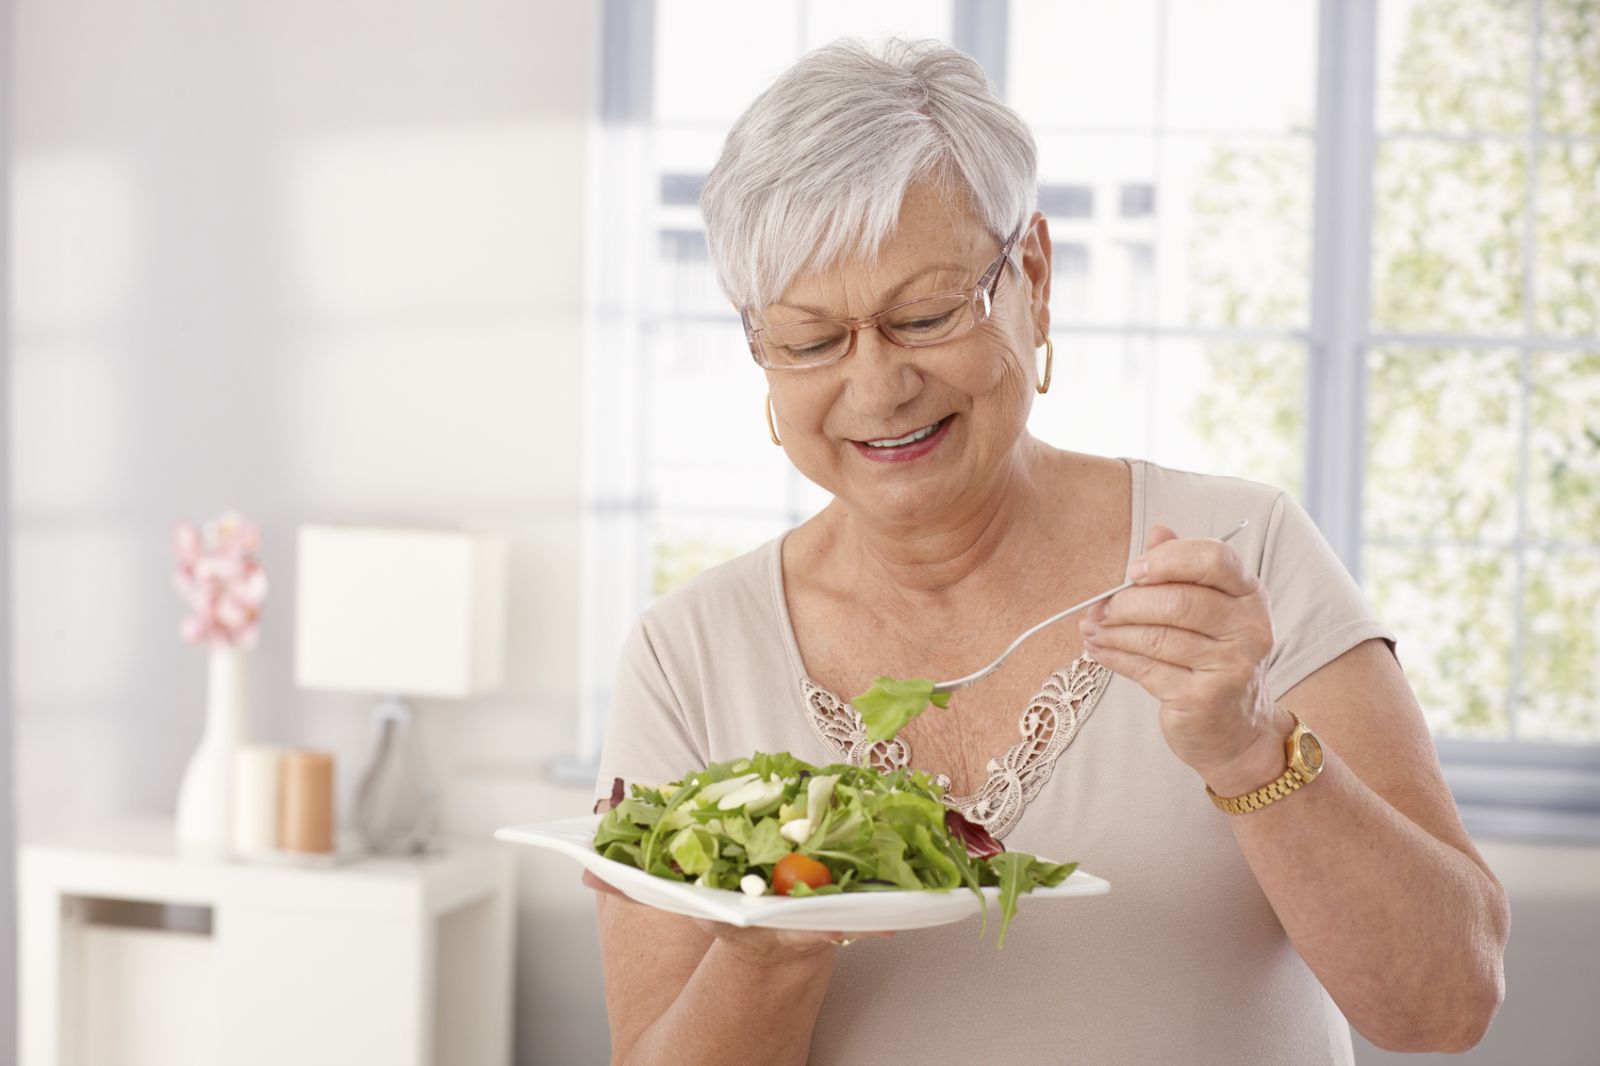 Switching to a healthy lifestyle can reduce the risk of stroke in middle-aged women